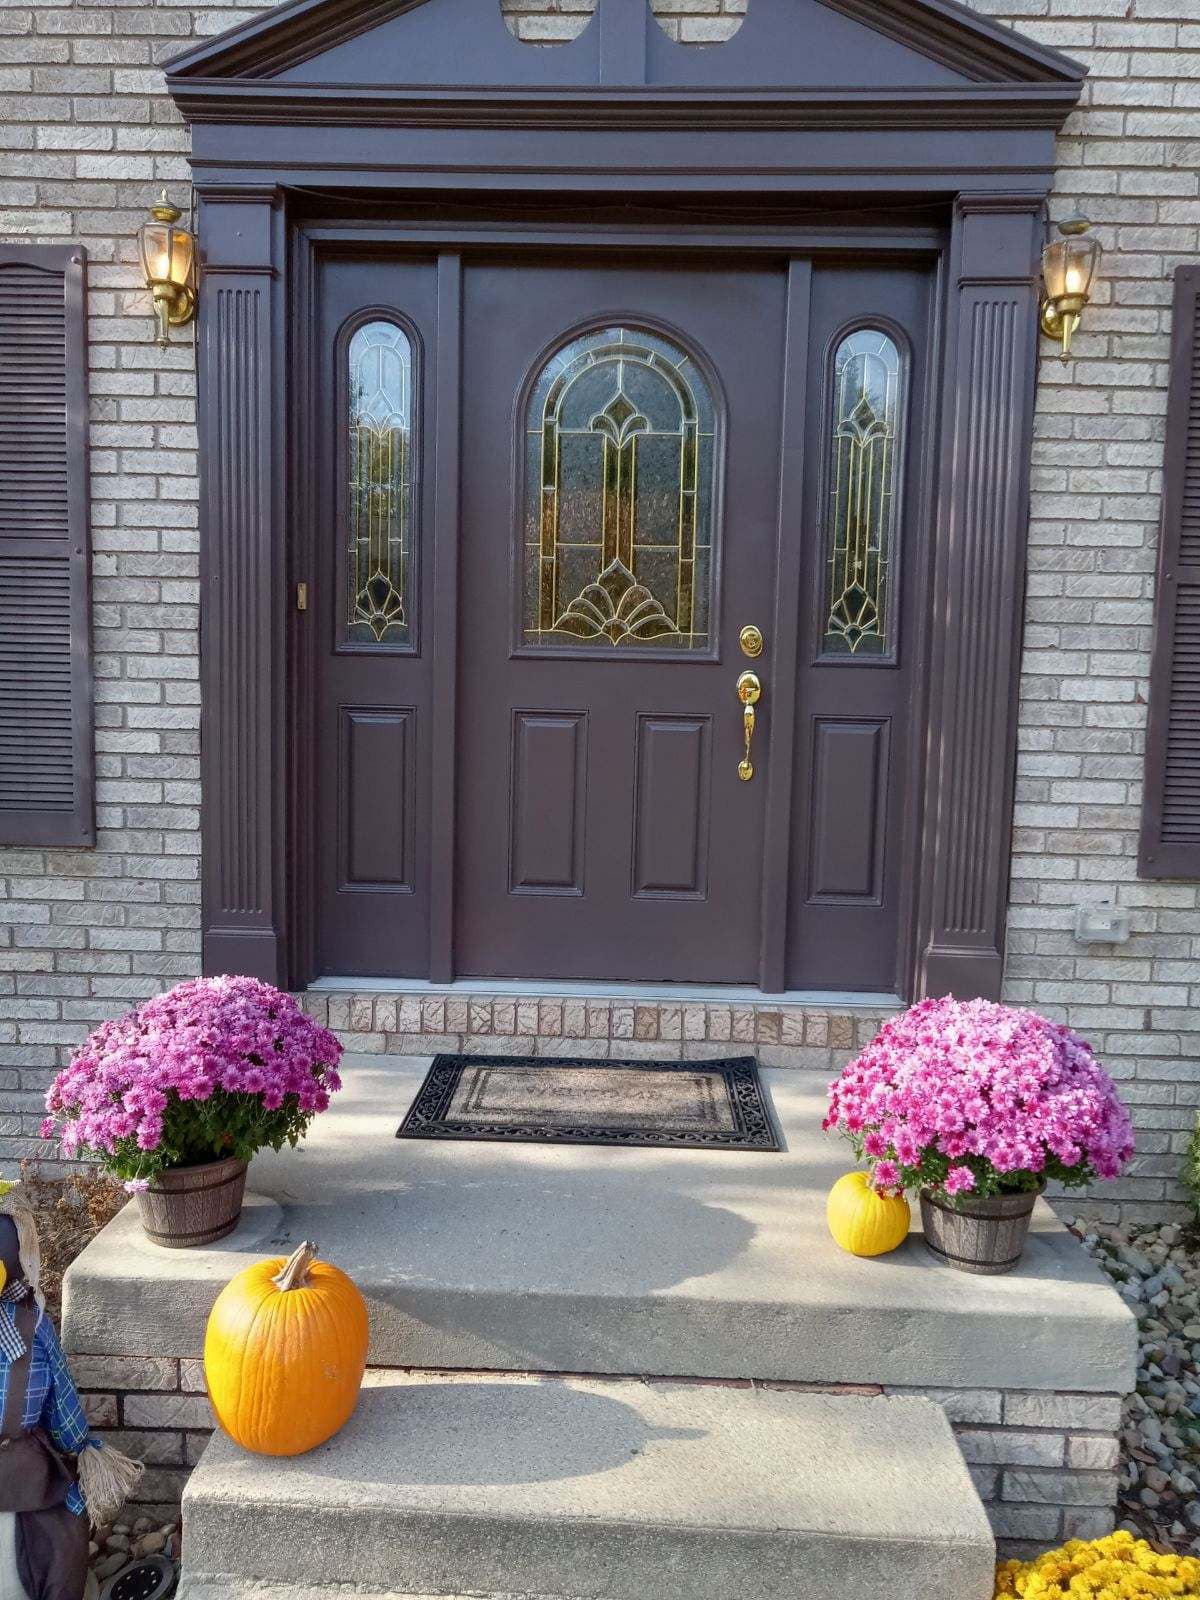 From Worn to Wow: Witness the incredible transformation of this front door by Reardon Painting. A stunning makeover that saved the homeowner over $8,000 without needing a replacement!